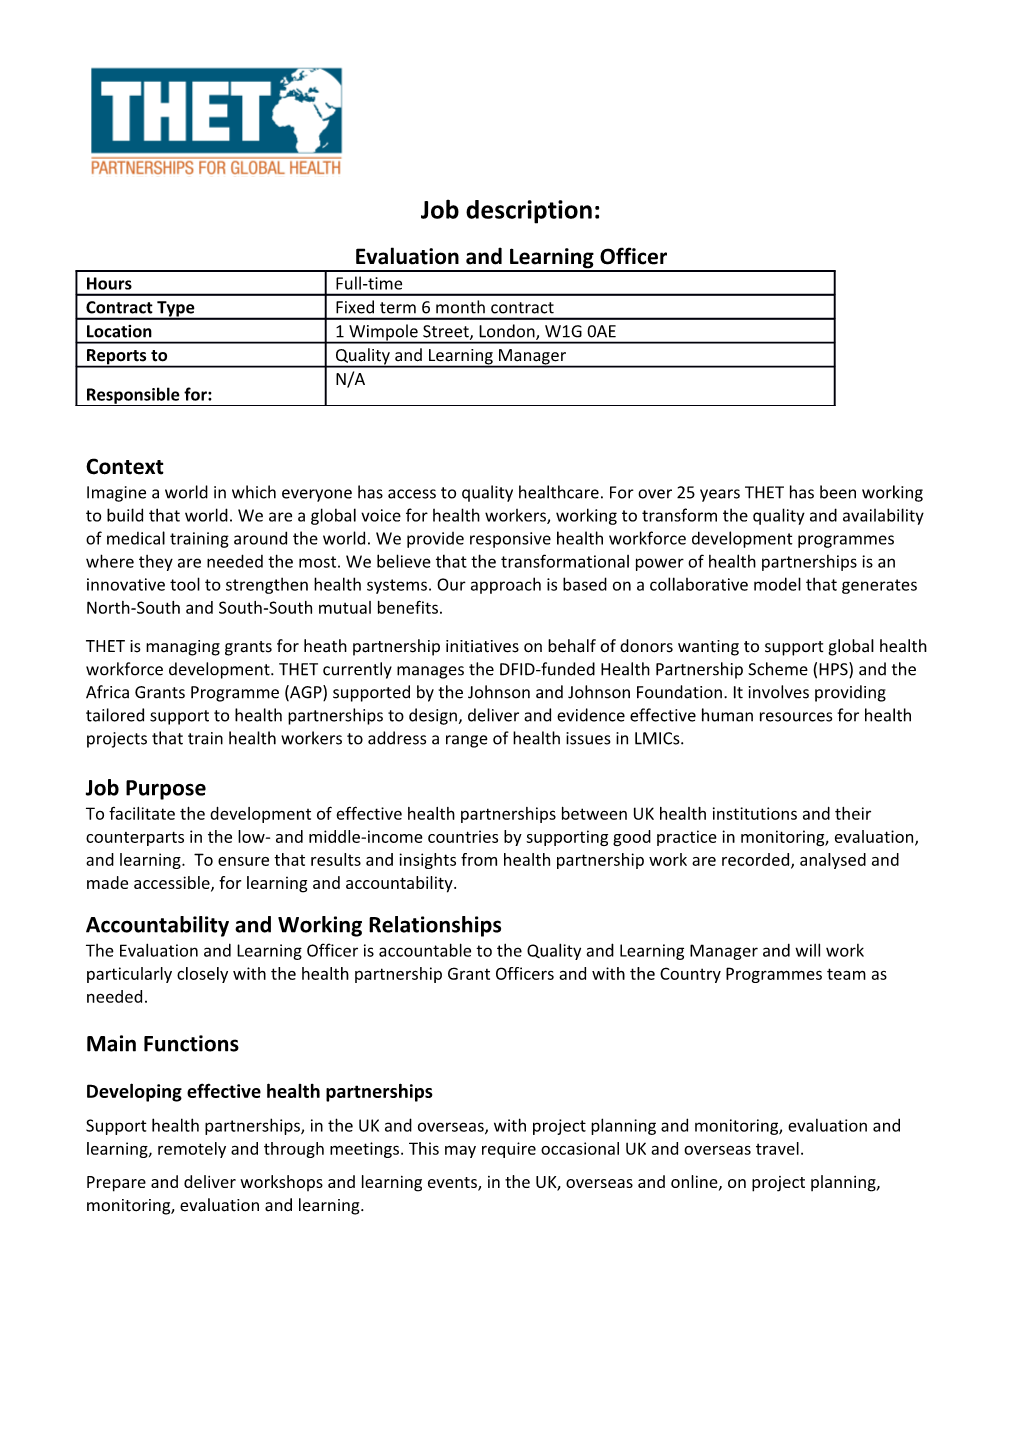 Evaluation and Learning Officer